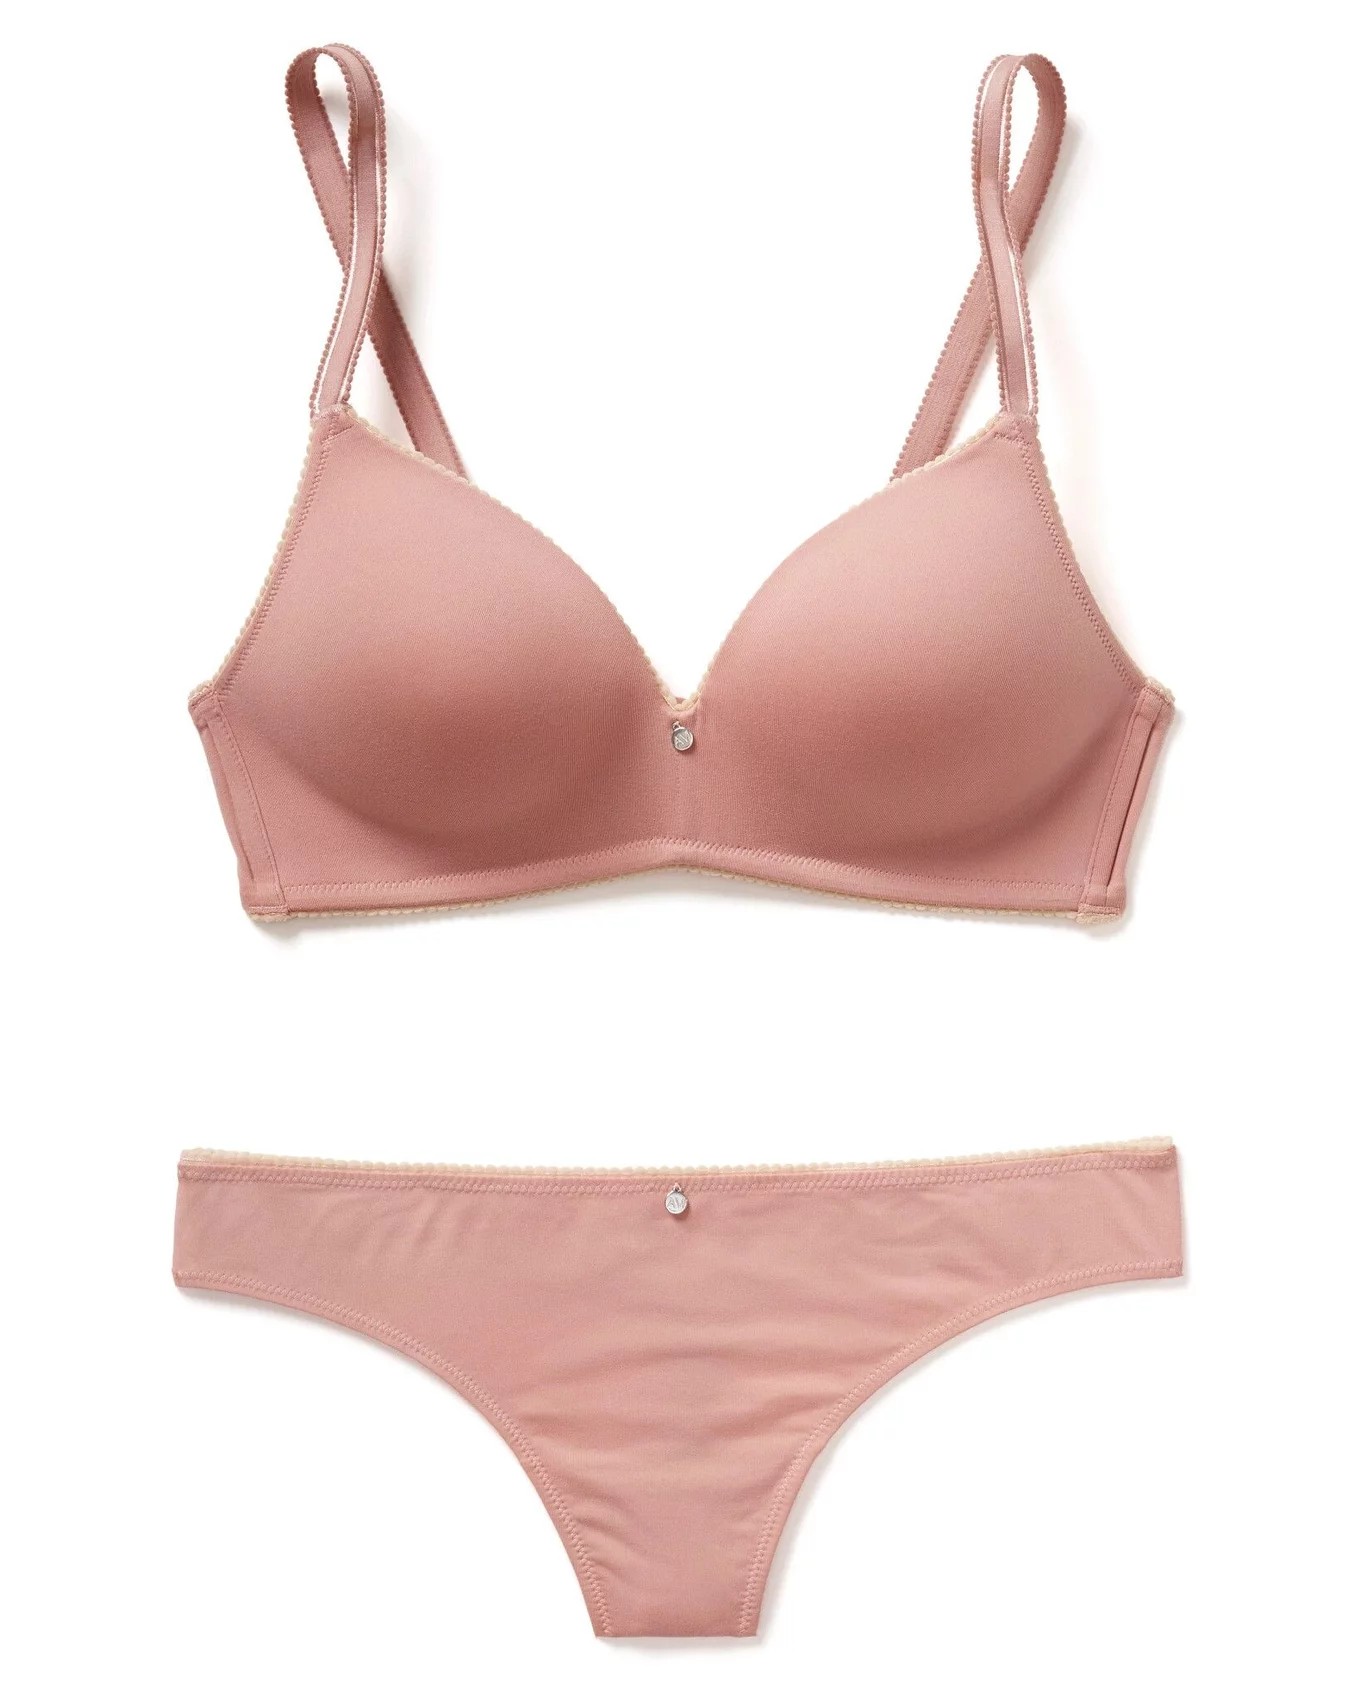 WomensNet Bra: Stunning and Comfortable Lingerie for the Modern Woman